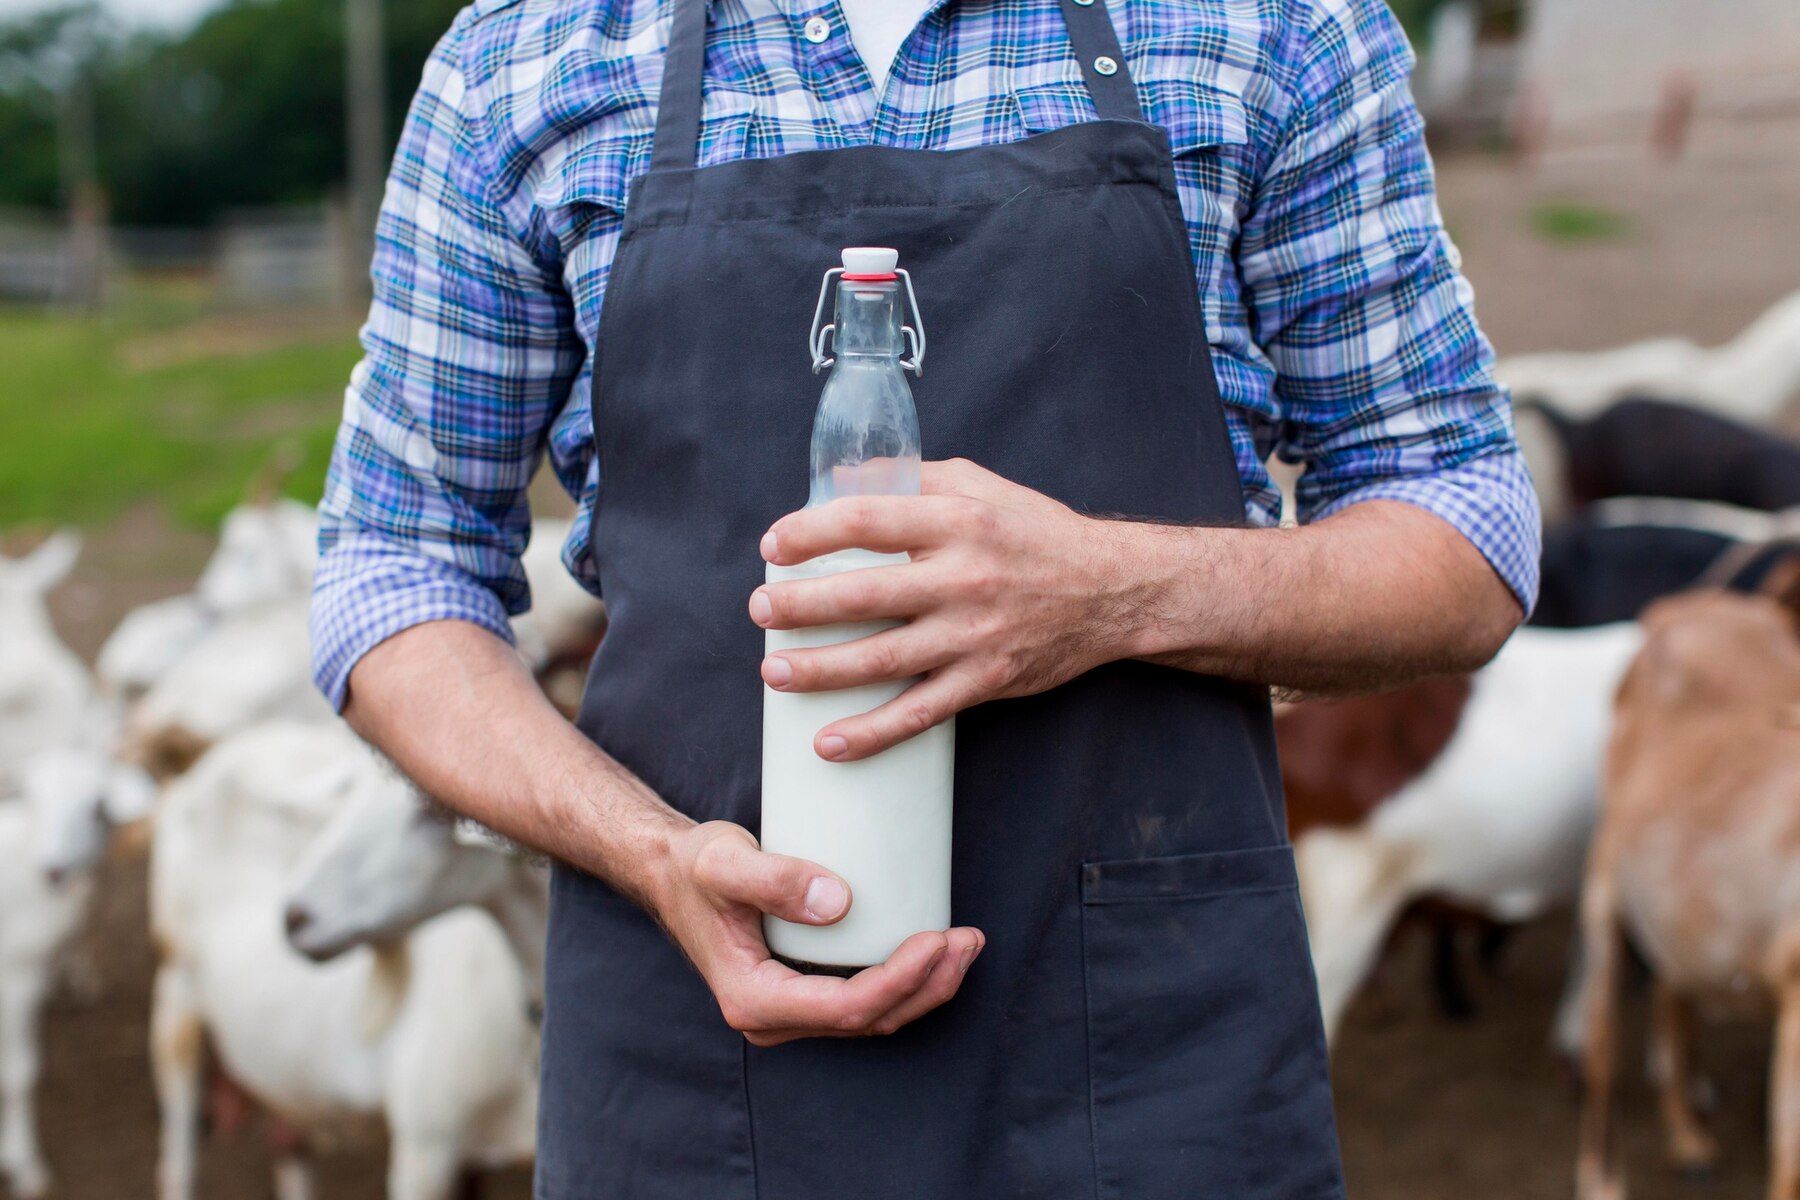 close-up-man-with-bottle-goats-milk_23-2148673055